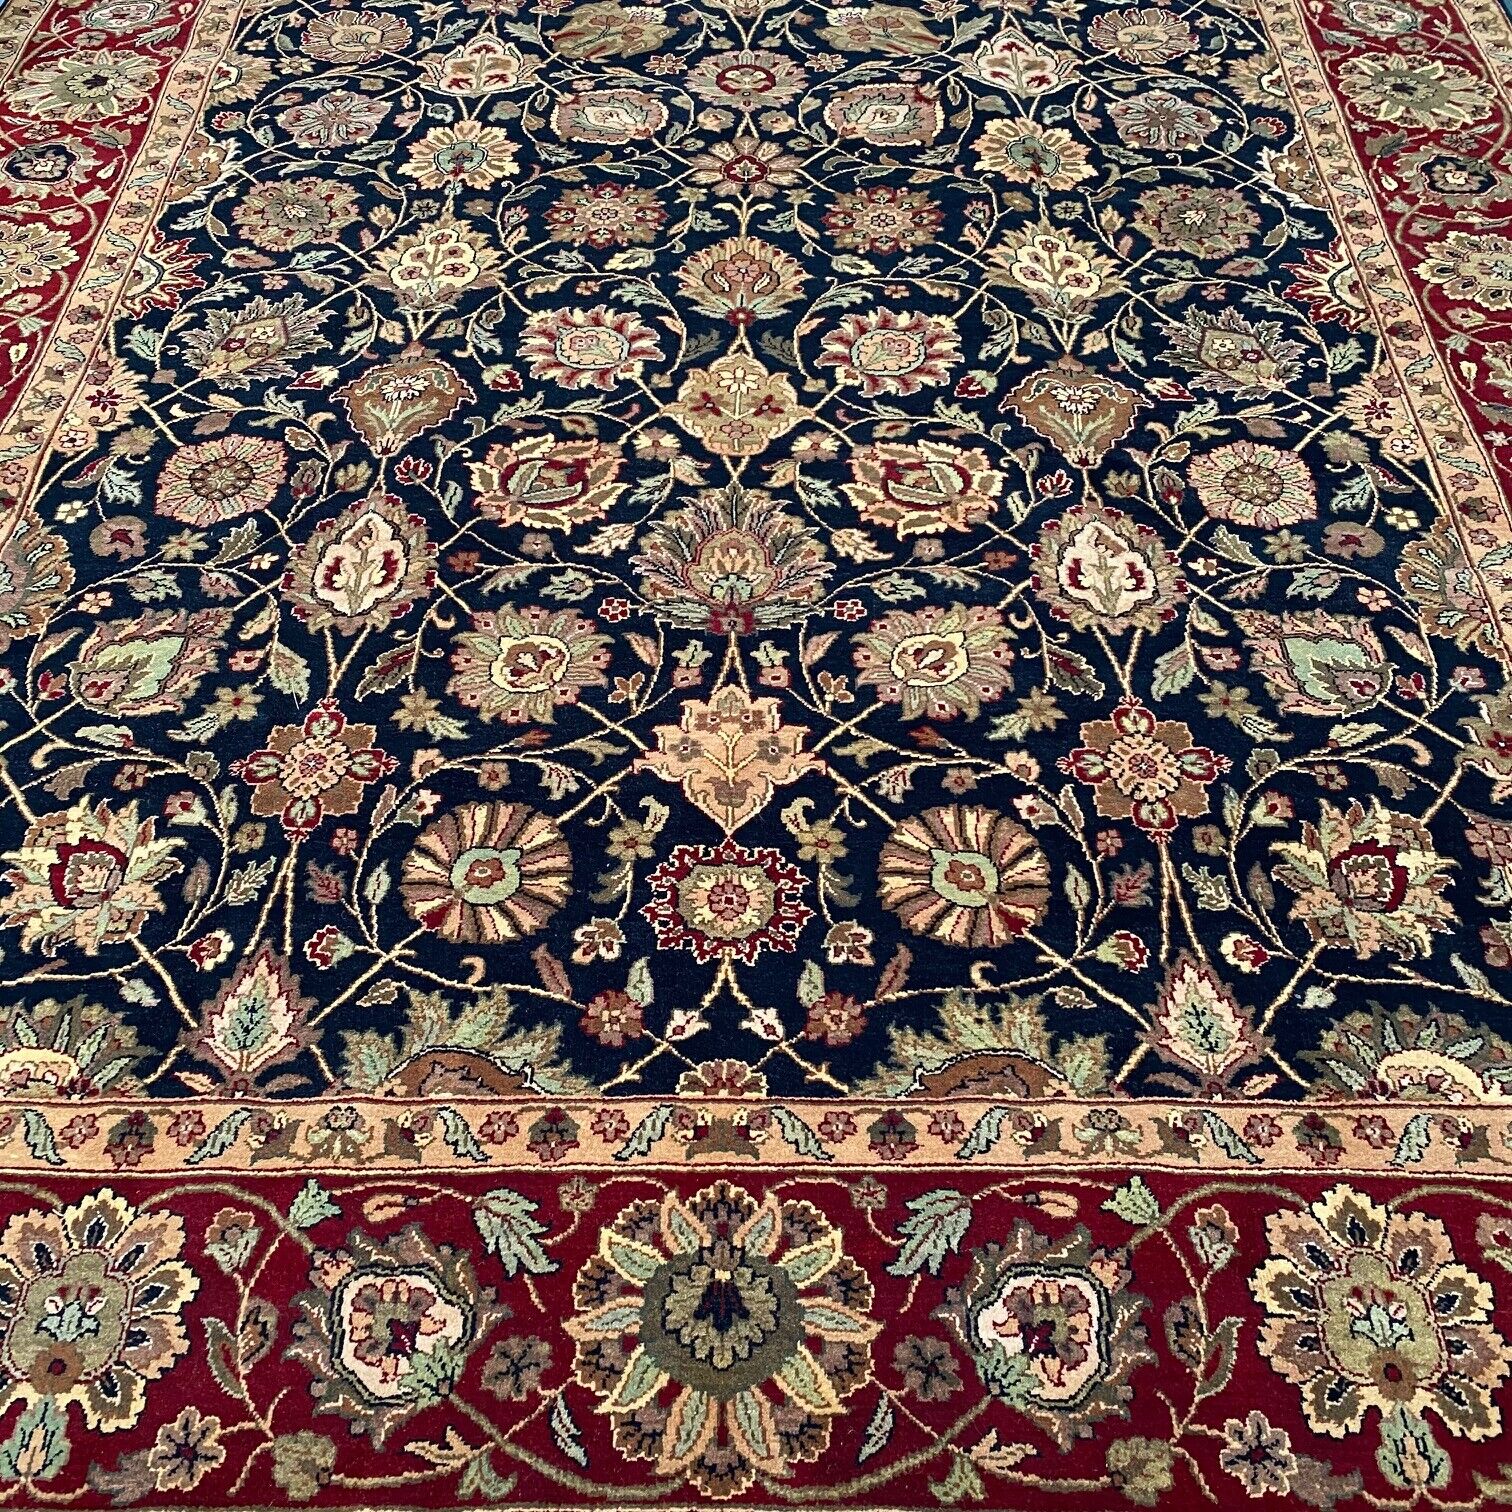 New Fine Quality Floral Oriental Rug Handmade in India, Thick Soft Pile, 9x12